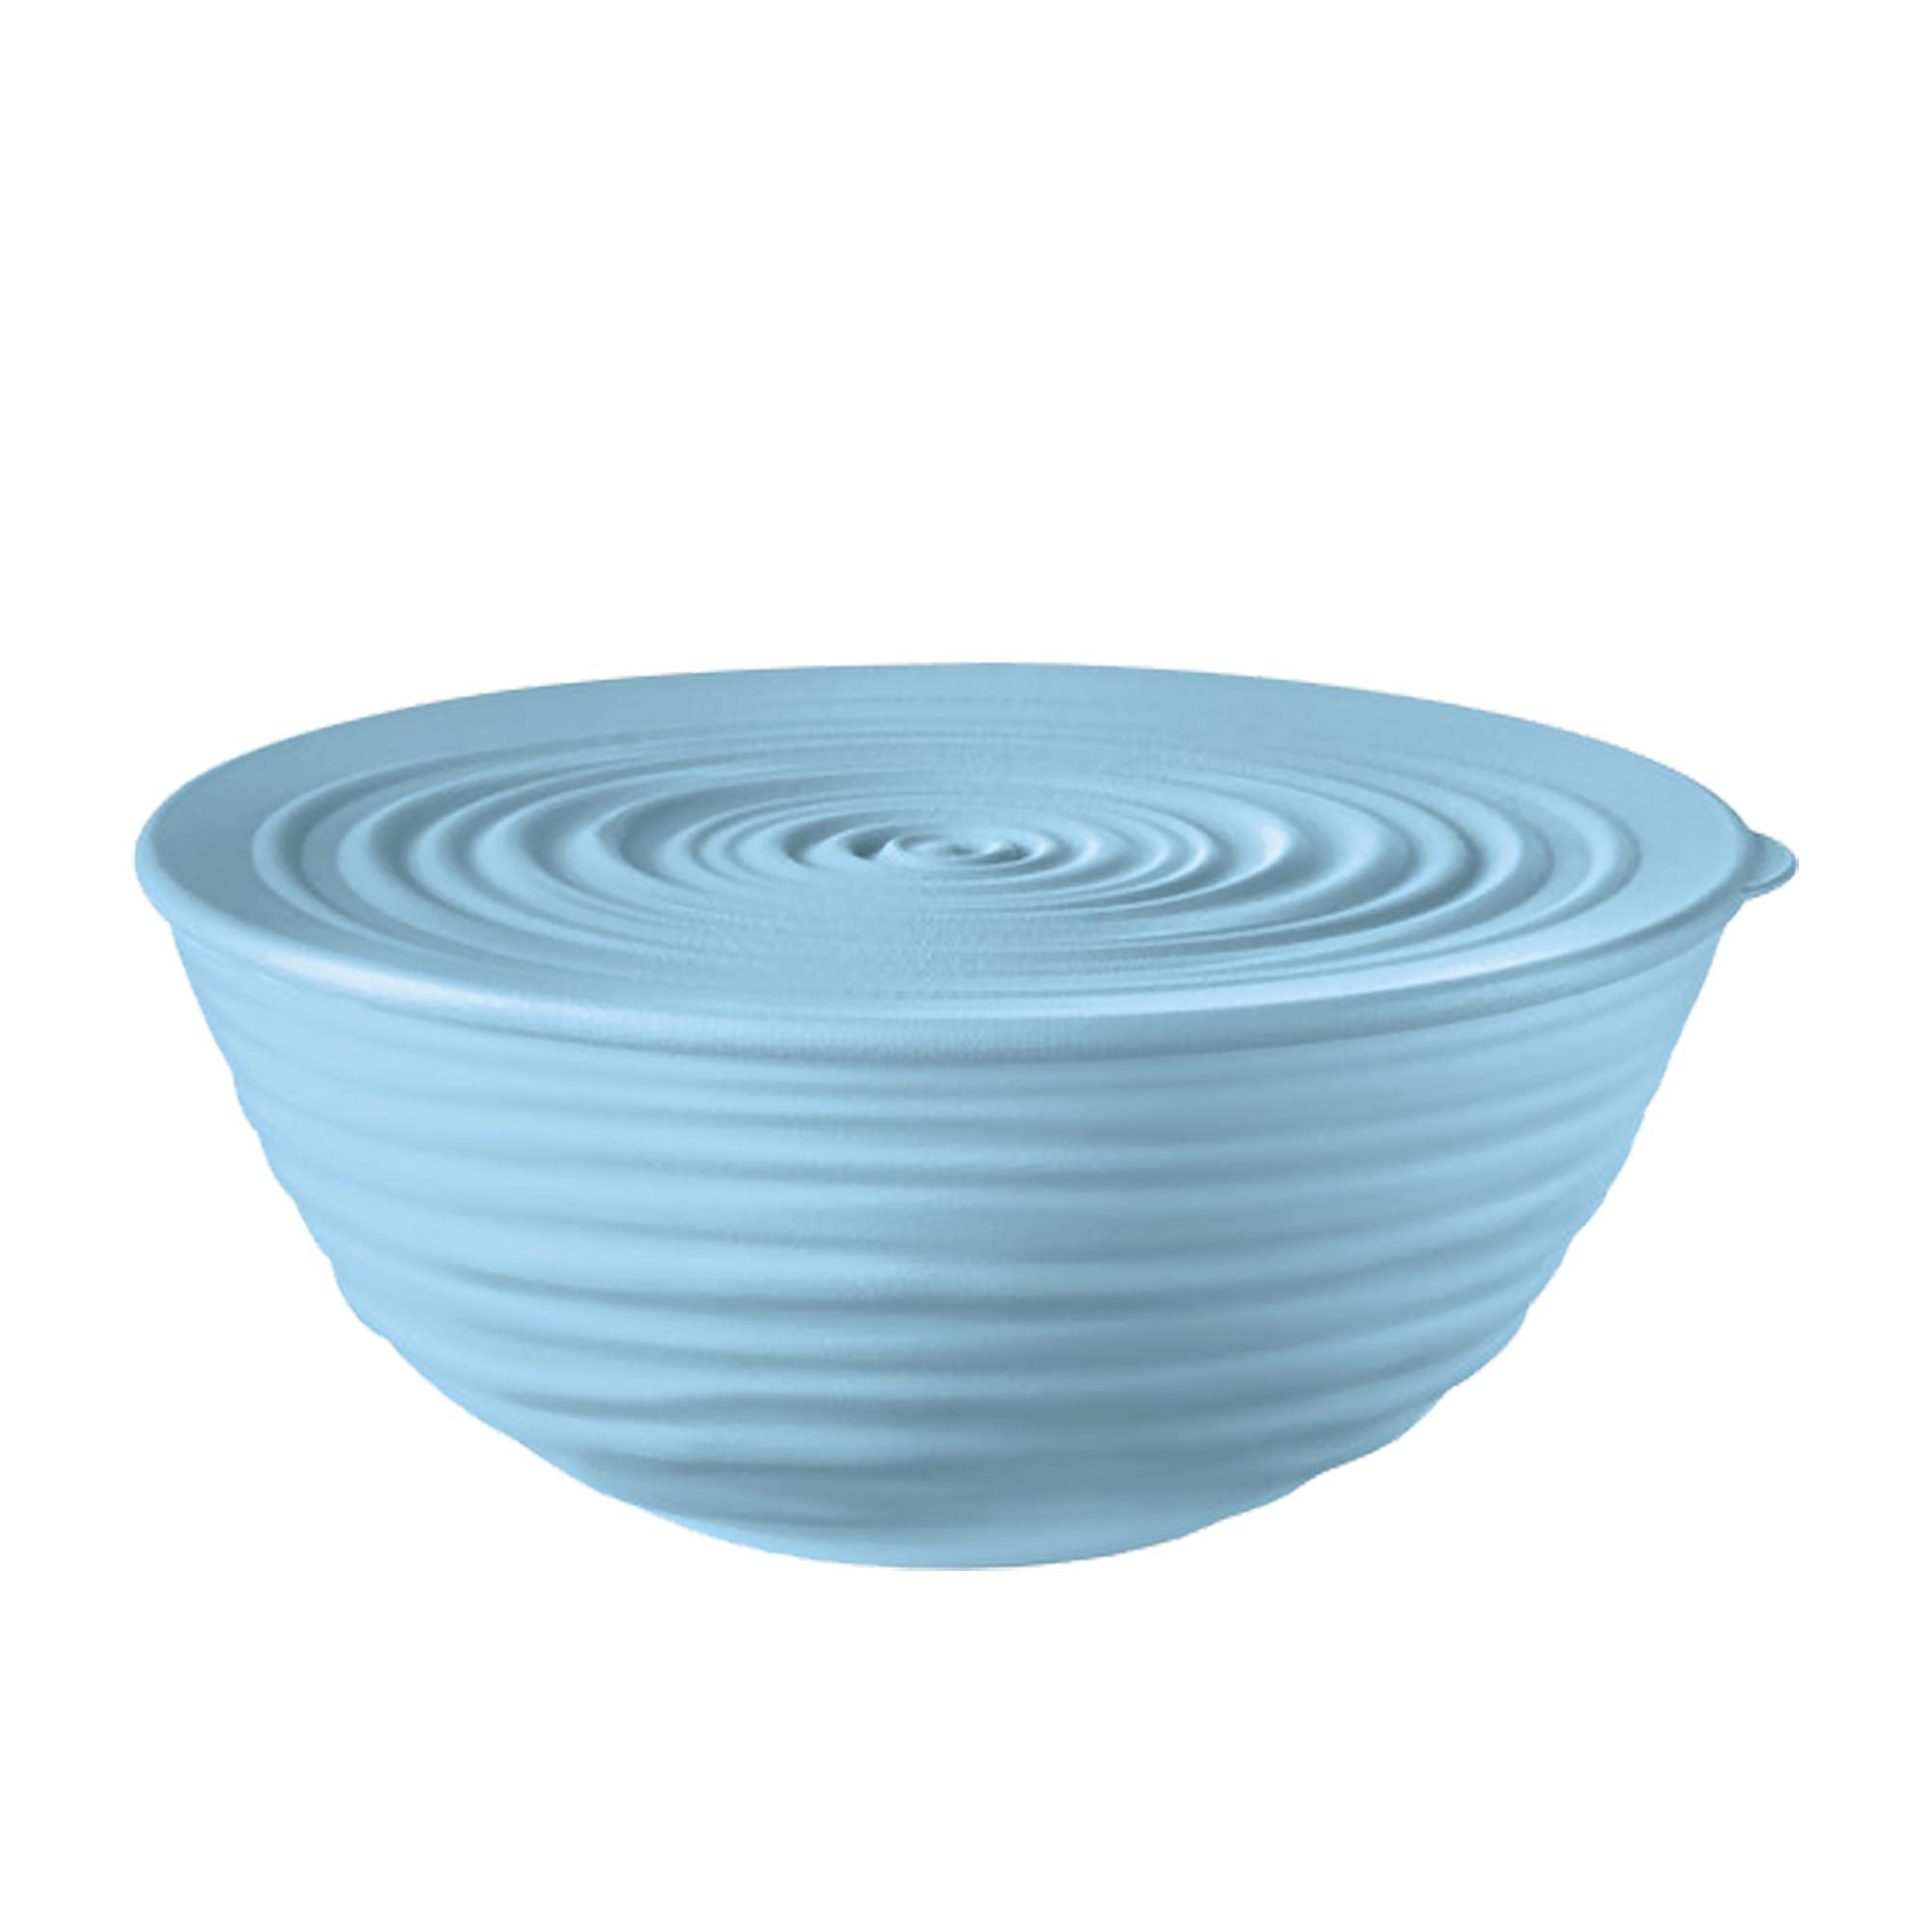 Guzzini Earth Tierra Bowl with Lid Extra Large Powder Blue Image 1